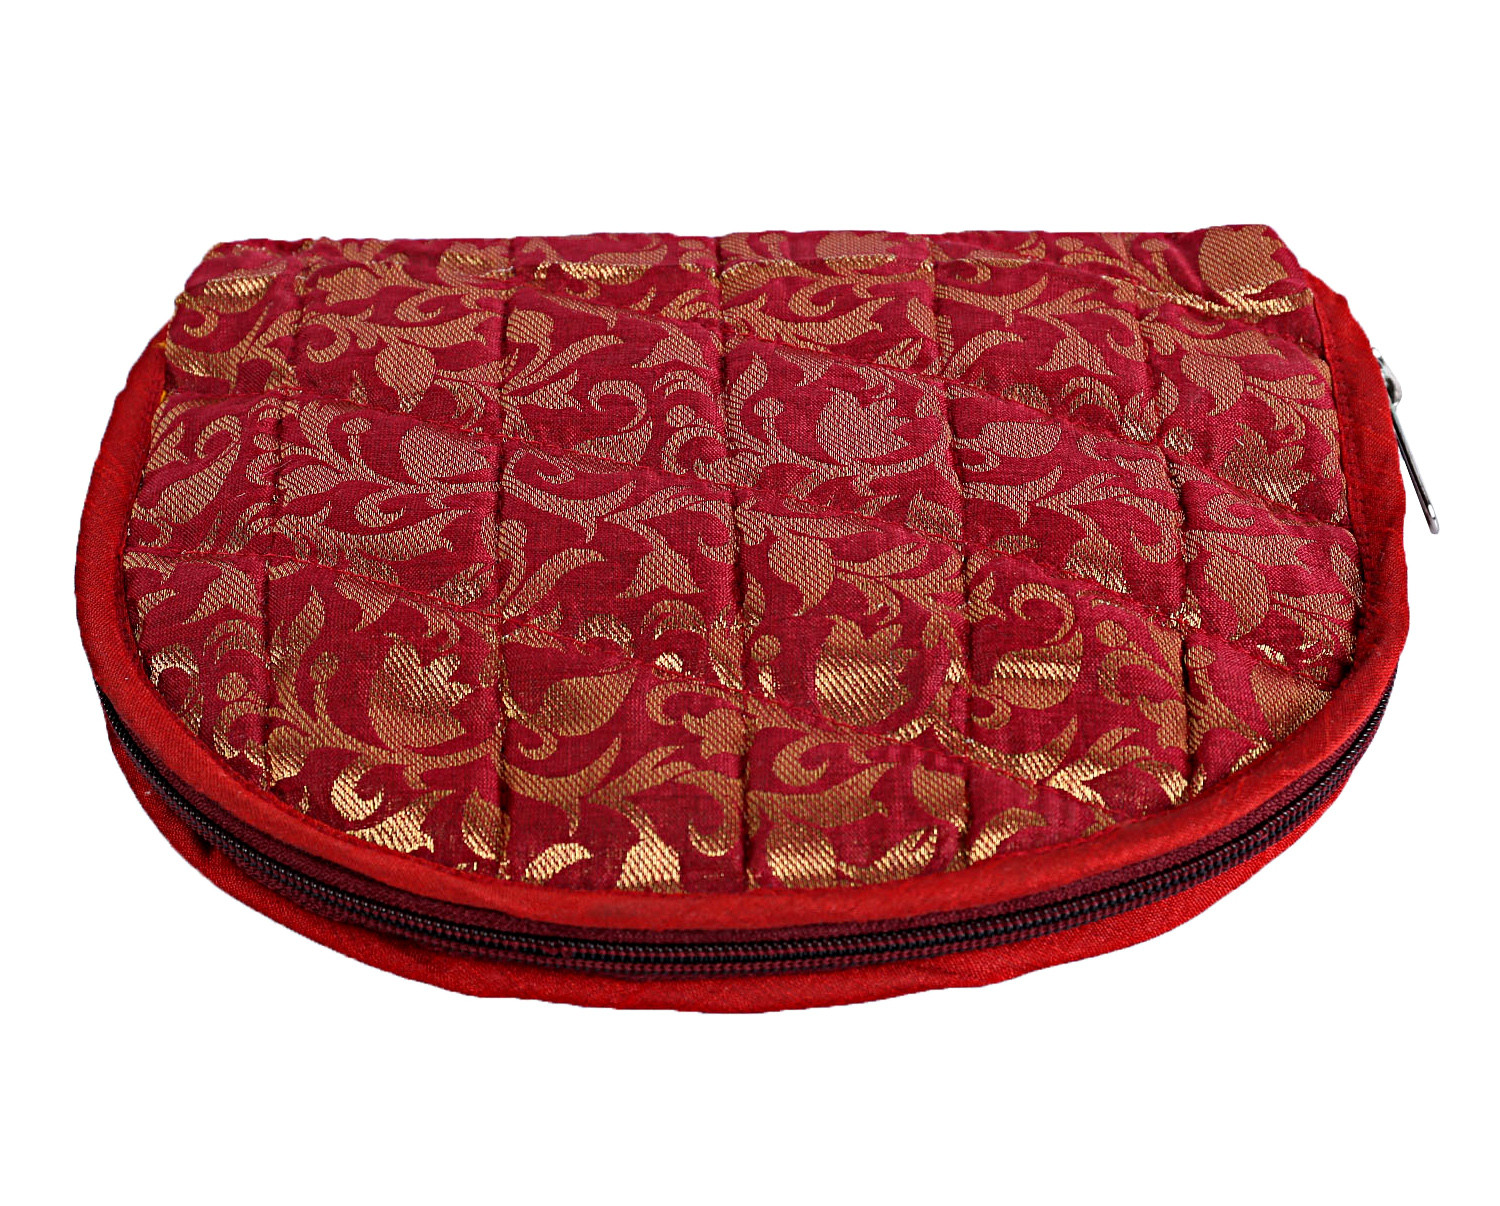 Kuber Industries Polyester Jacquard Print Toiletry Organizer With 4 Transparent Poches & 1 Extra Compartment,Zipper Closure (Red)